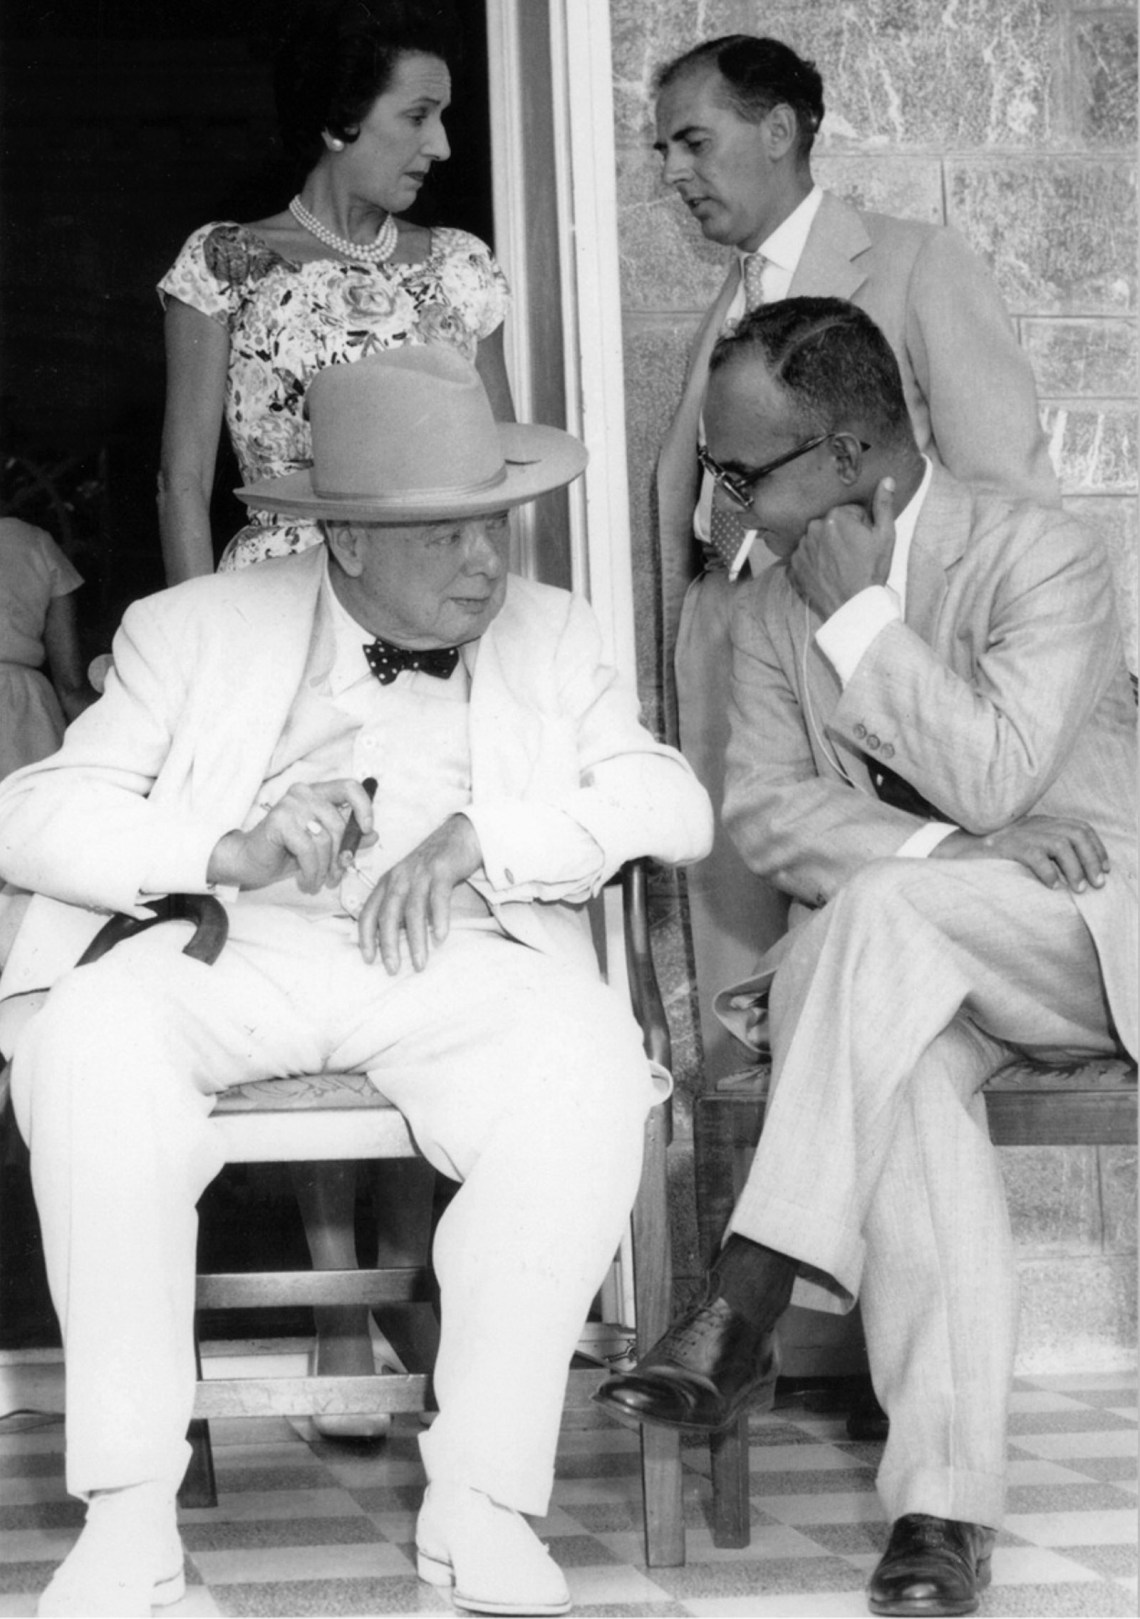 Winston Churchill, former prime minister of the United Kingdom, and Eric Williams, premier of Trinidad and Tobago